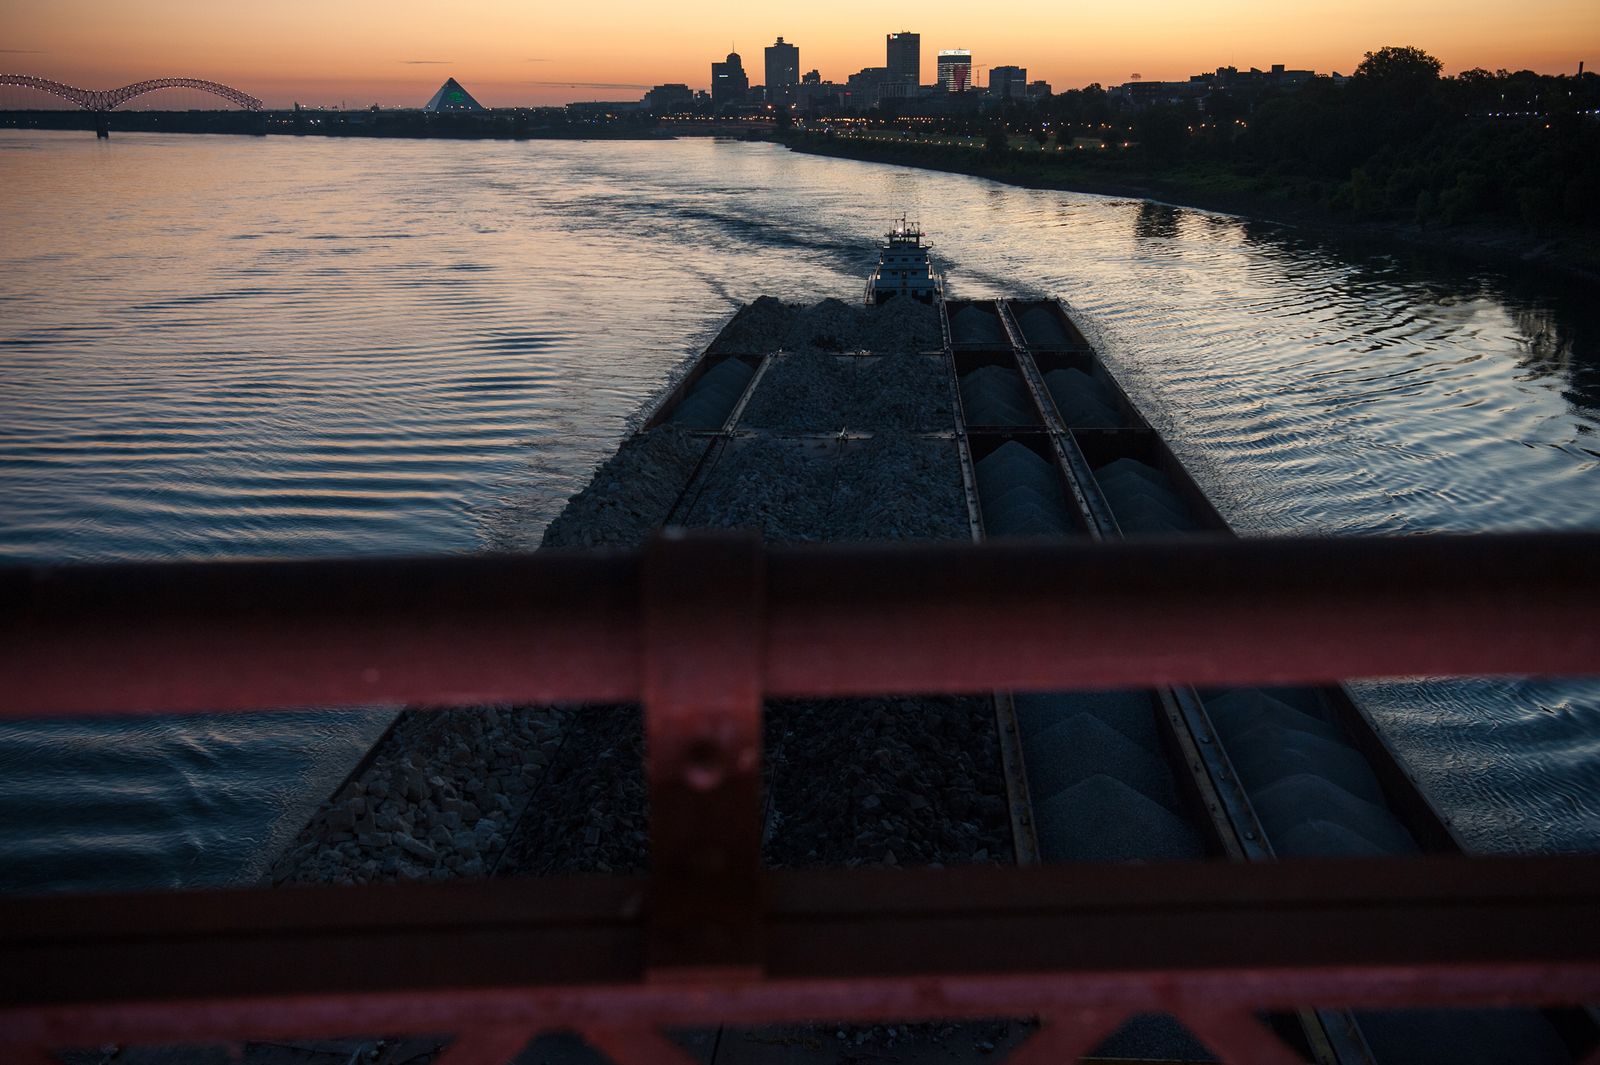 © Rory Doyle - A barge works its way downstream in Memphis, Tennessee, USA.